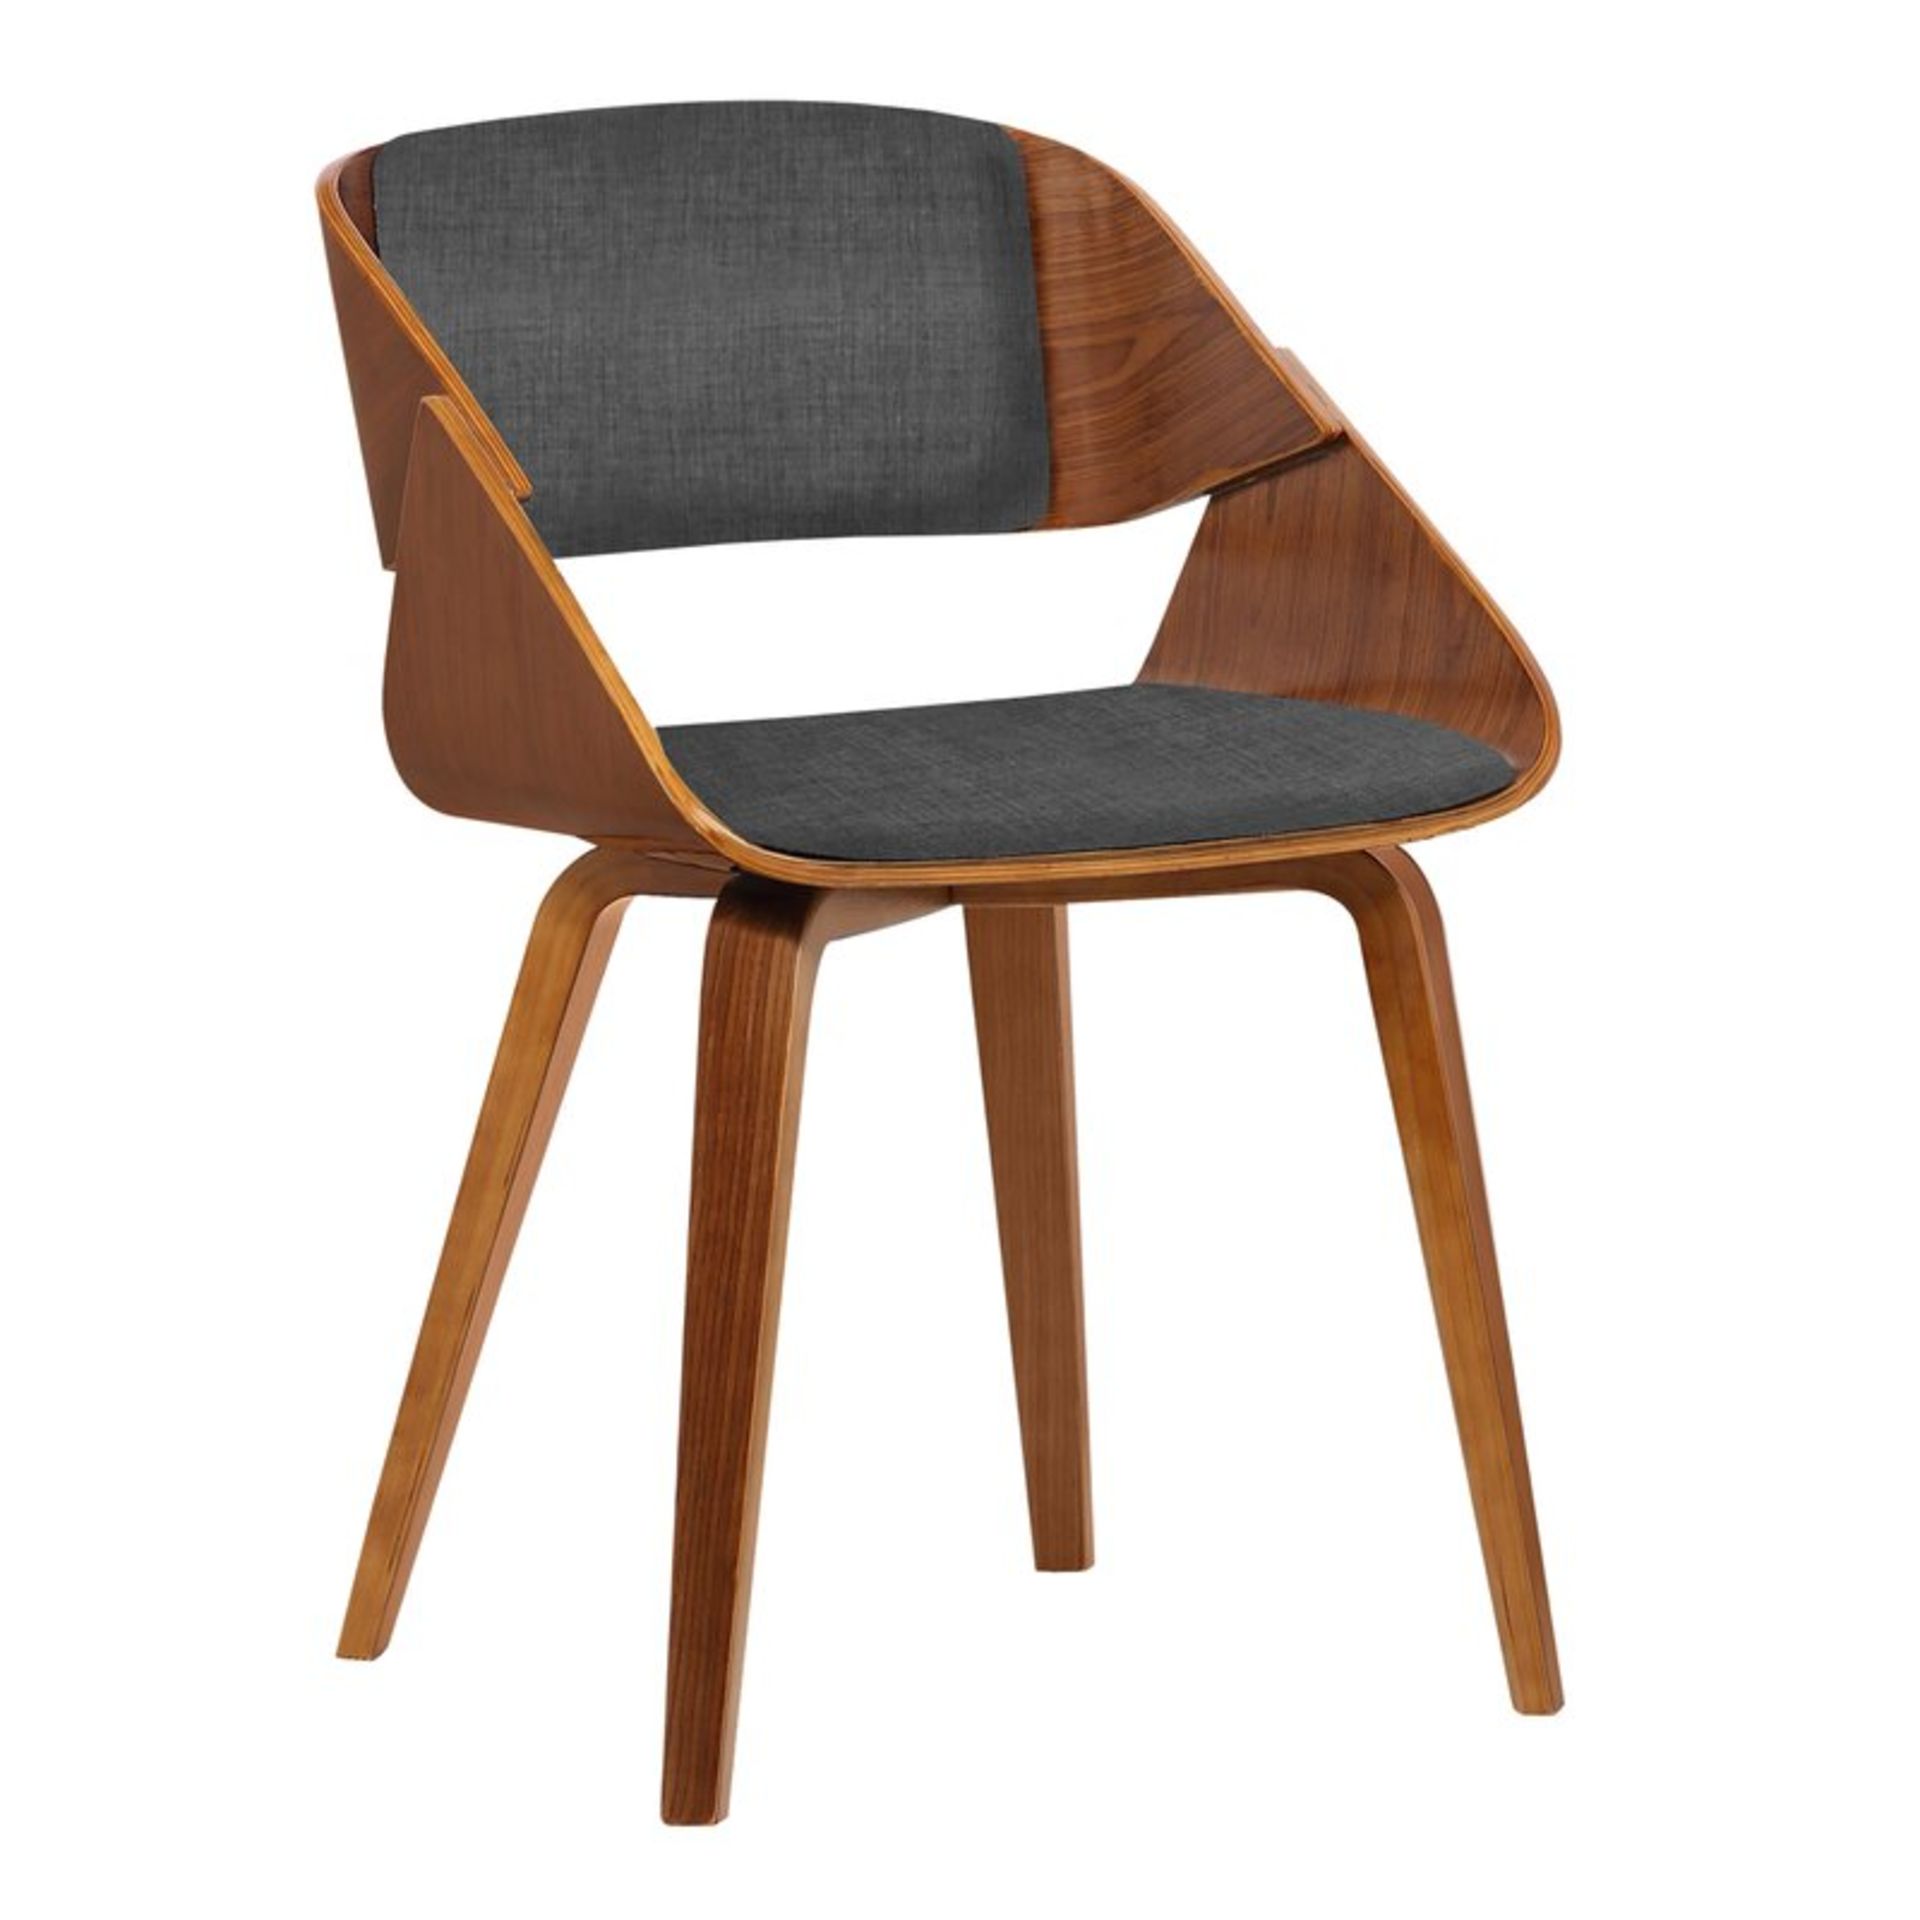 Essex Upholstered Dining Chair - RRP £127.99